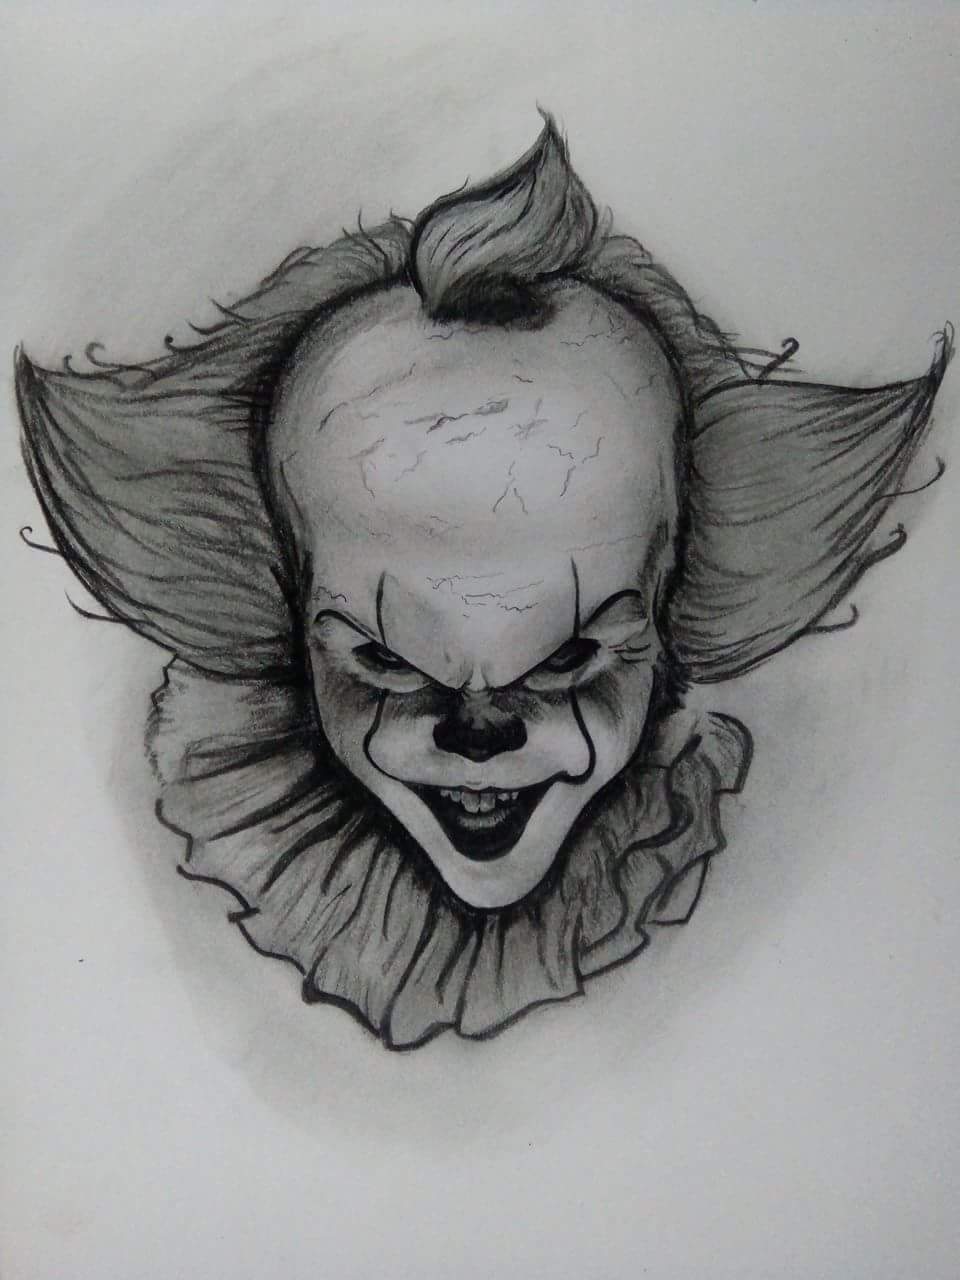 How to Draw Pennywise Easy | How to draw pennywise easy from… | Flickr